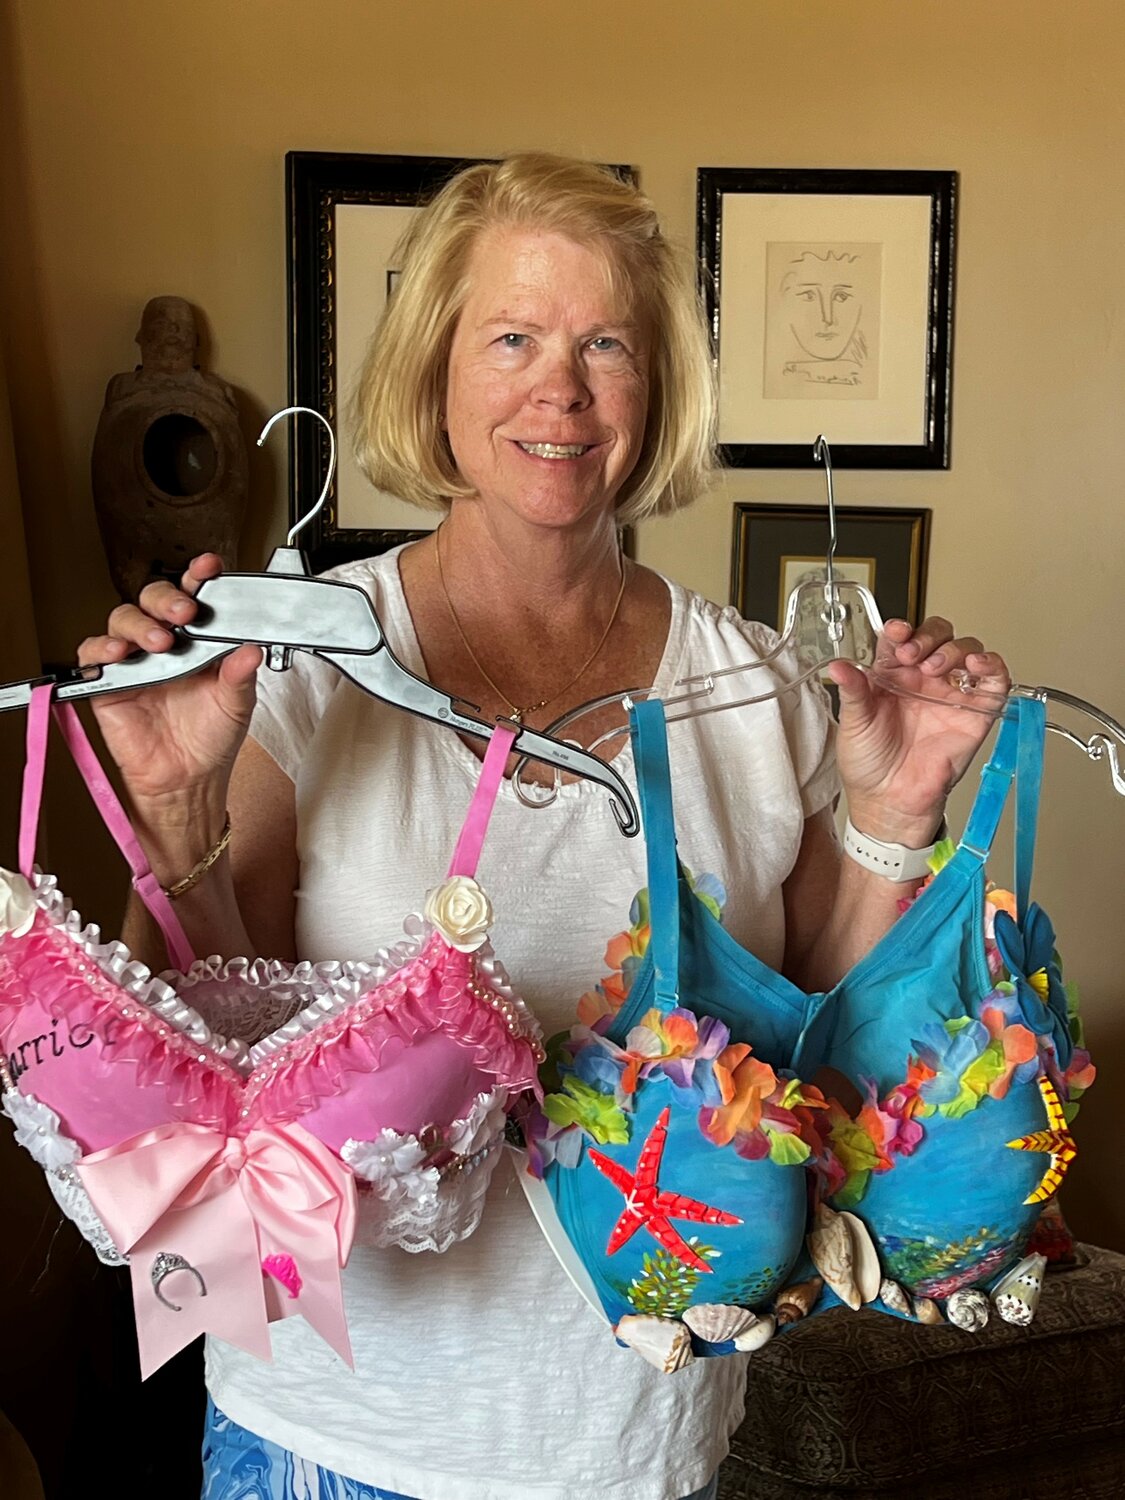 Kim Miller with her bra designs “Princess Warrior” and “Surf’s Up”